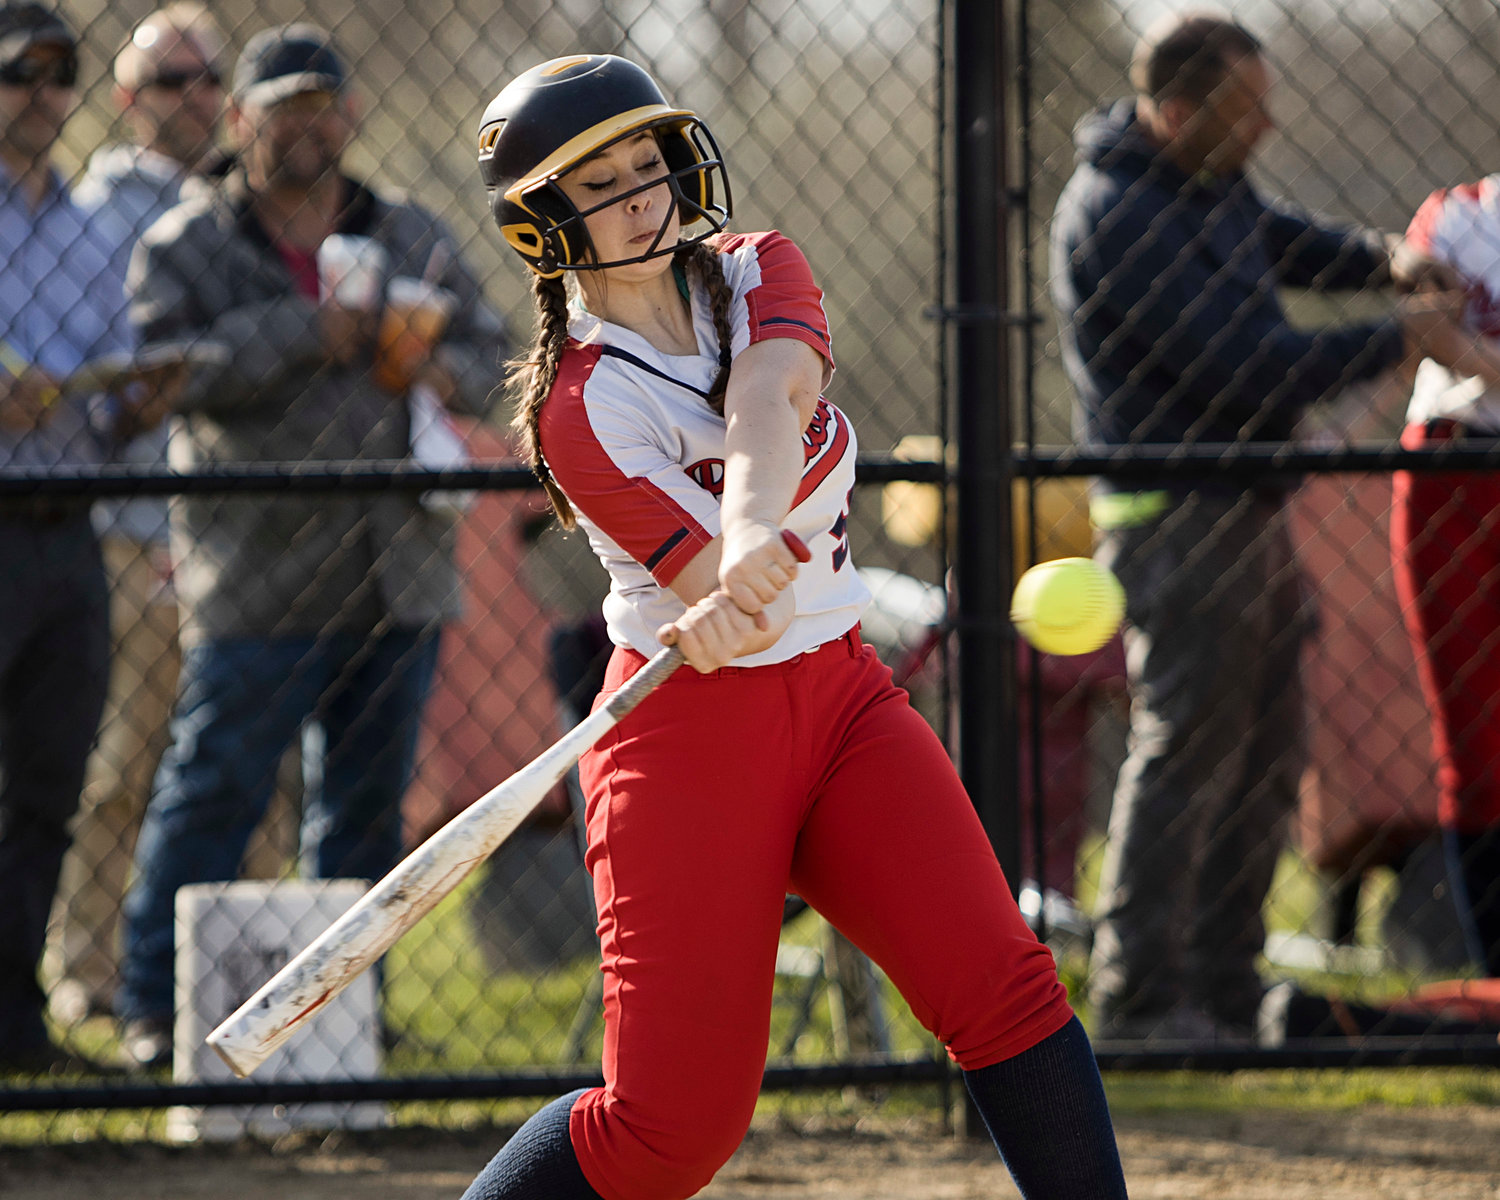 Gabriella Pires makes contact while at bat with a full count.